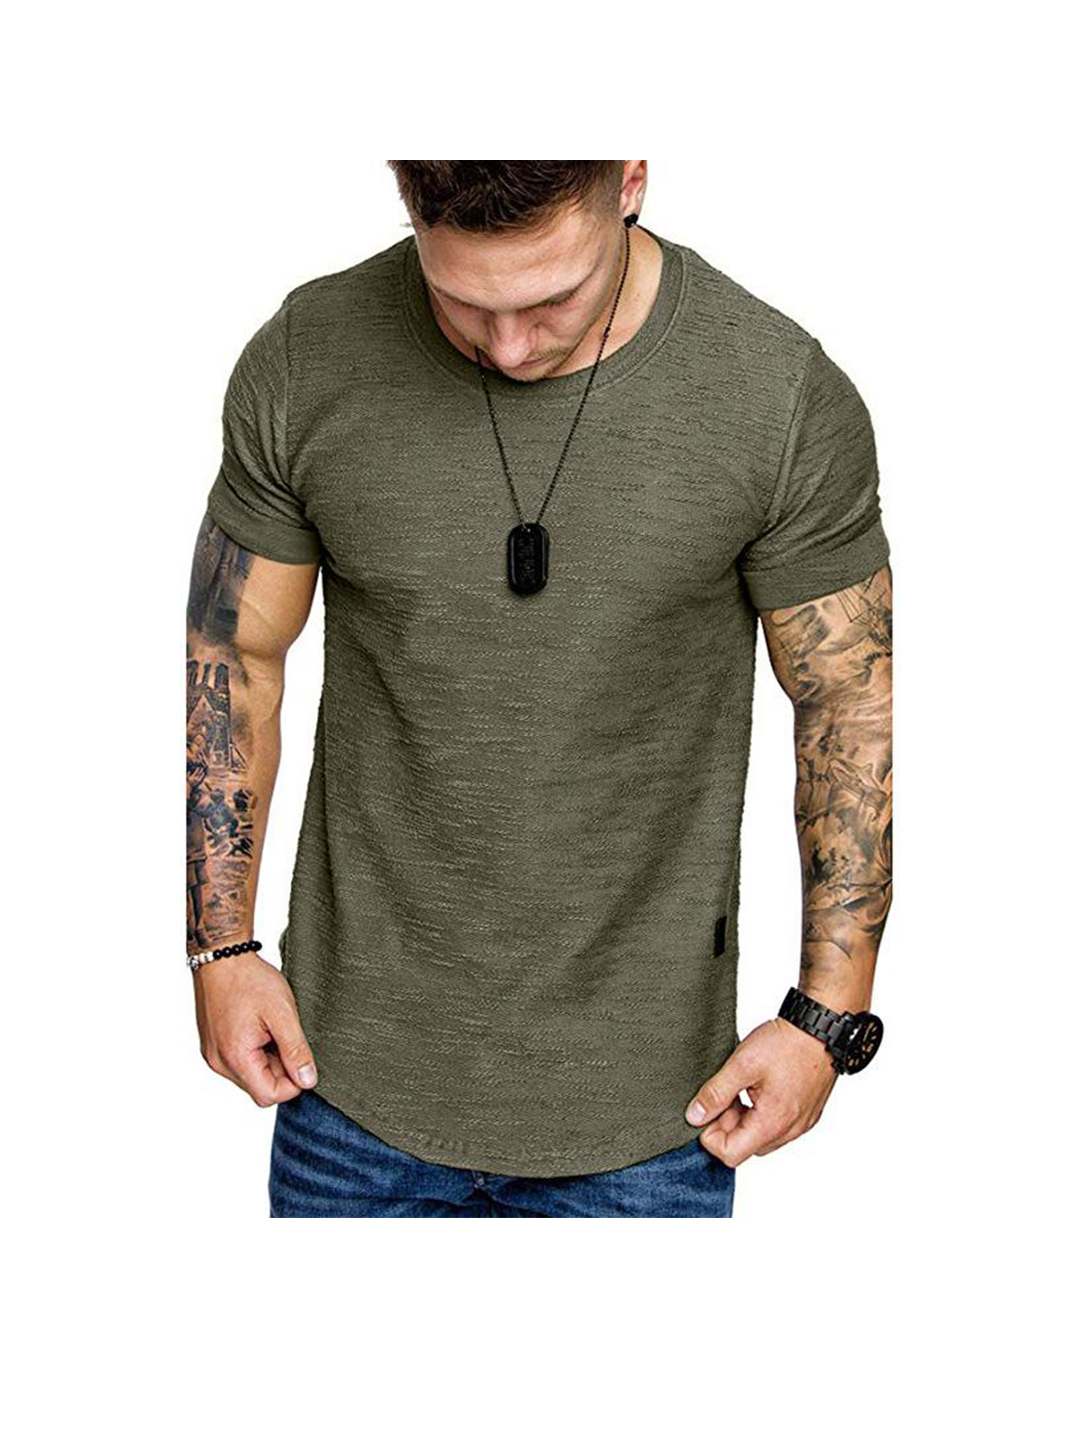 Men's Textured Solid High Quality Crew Neck T-shirt Soft Breathable-poisonstreetwear.com